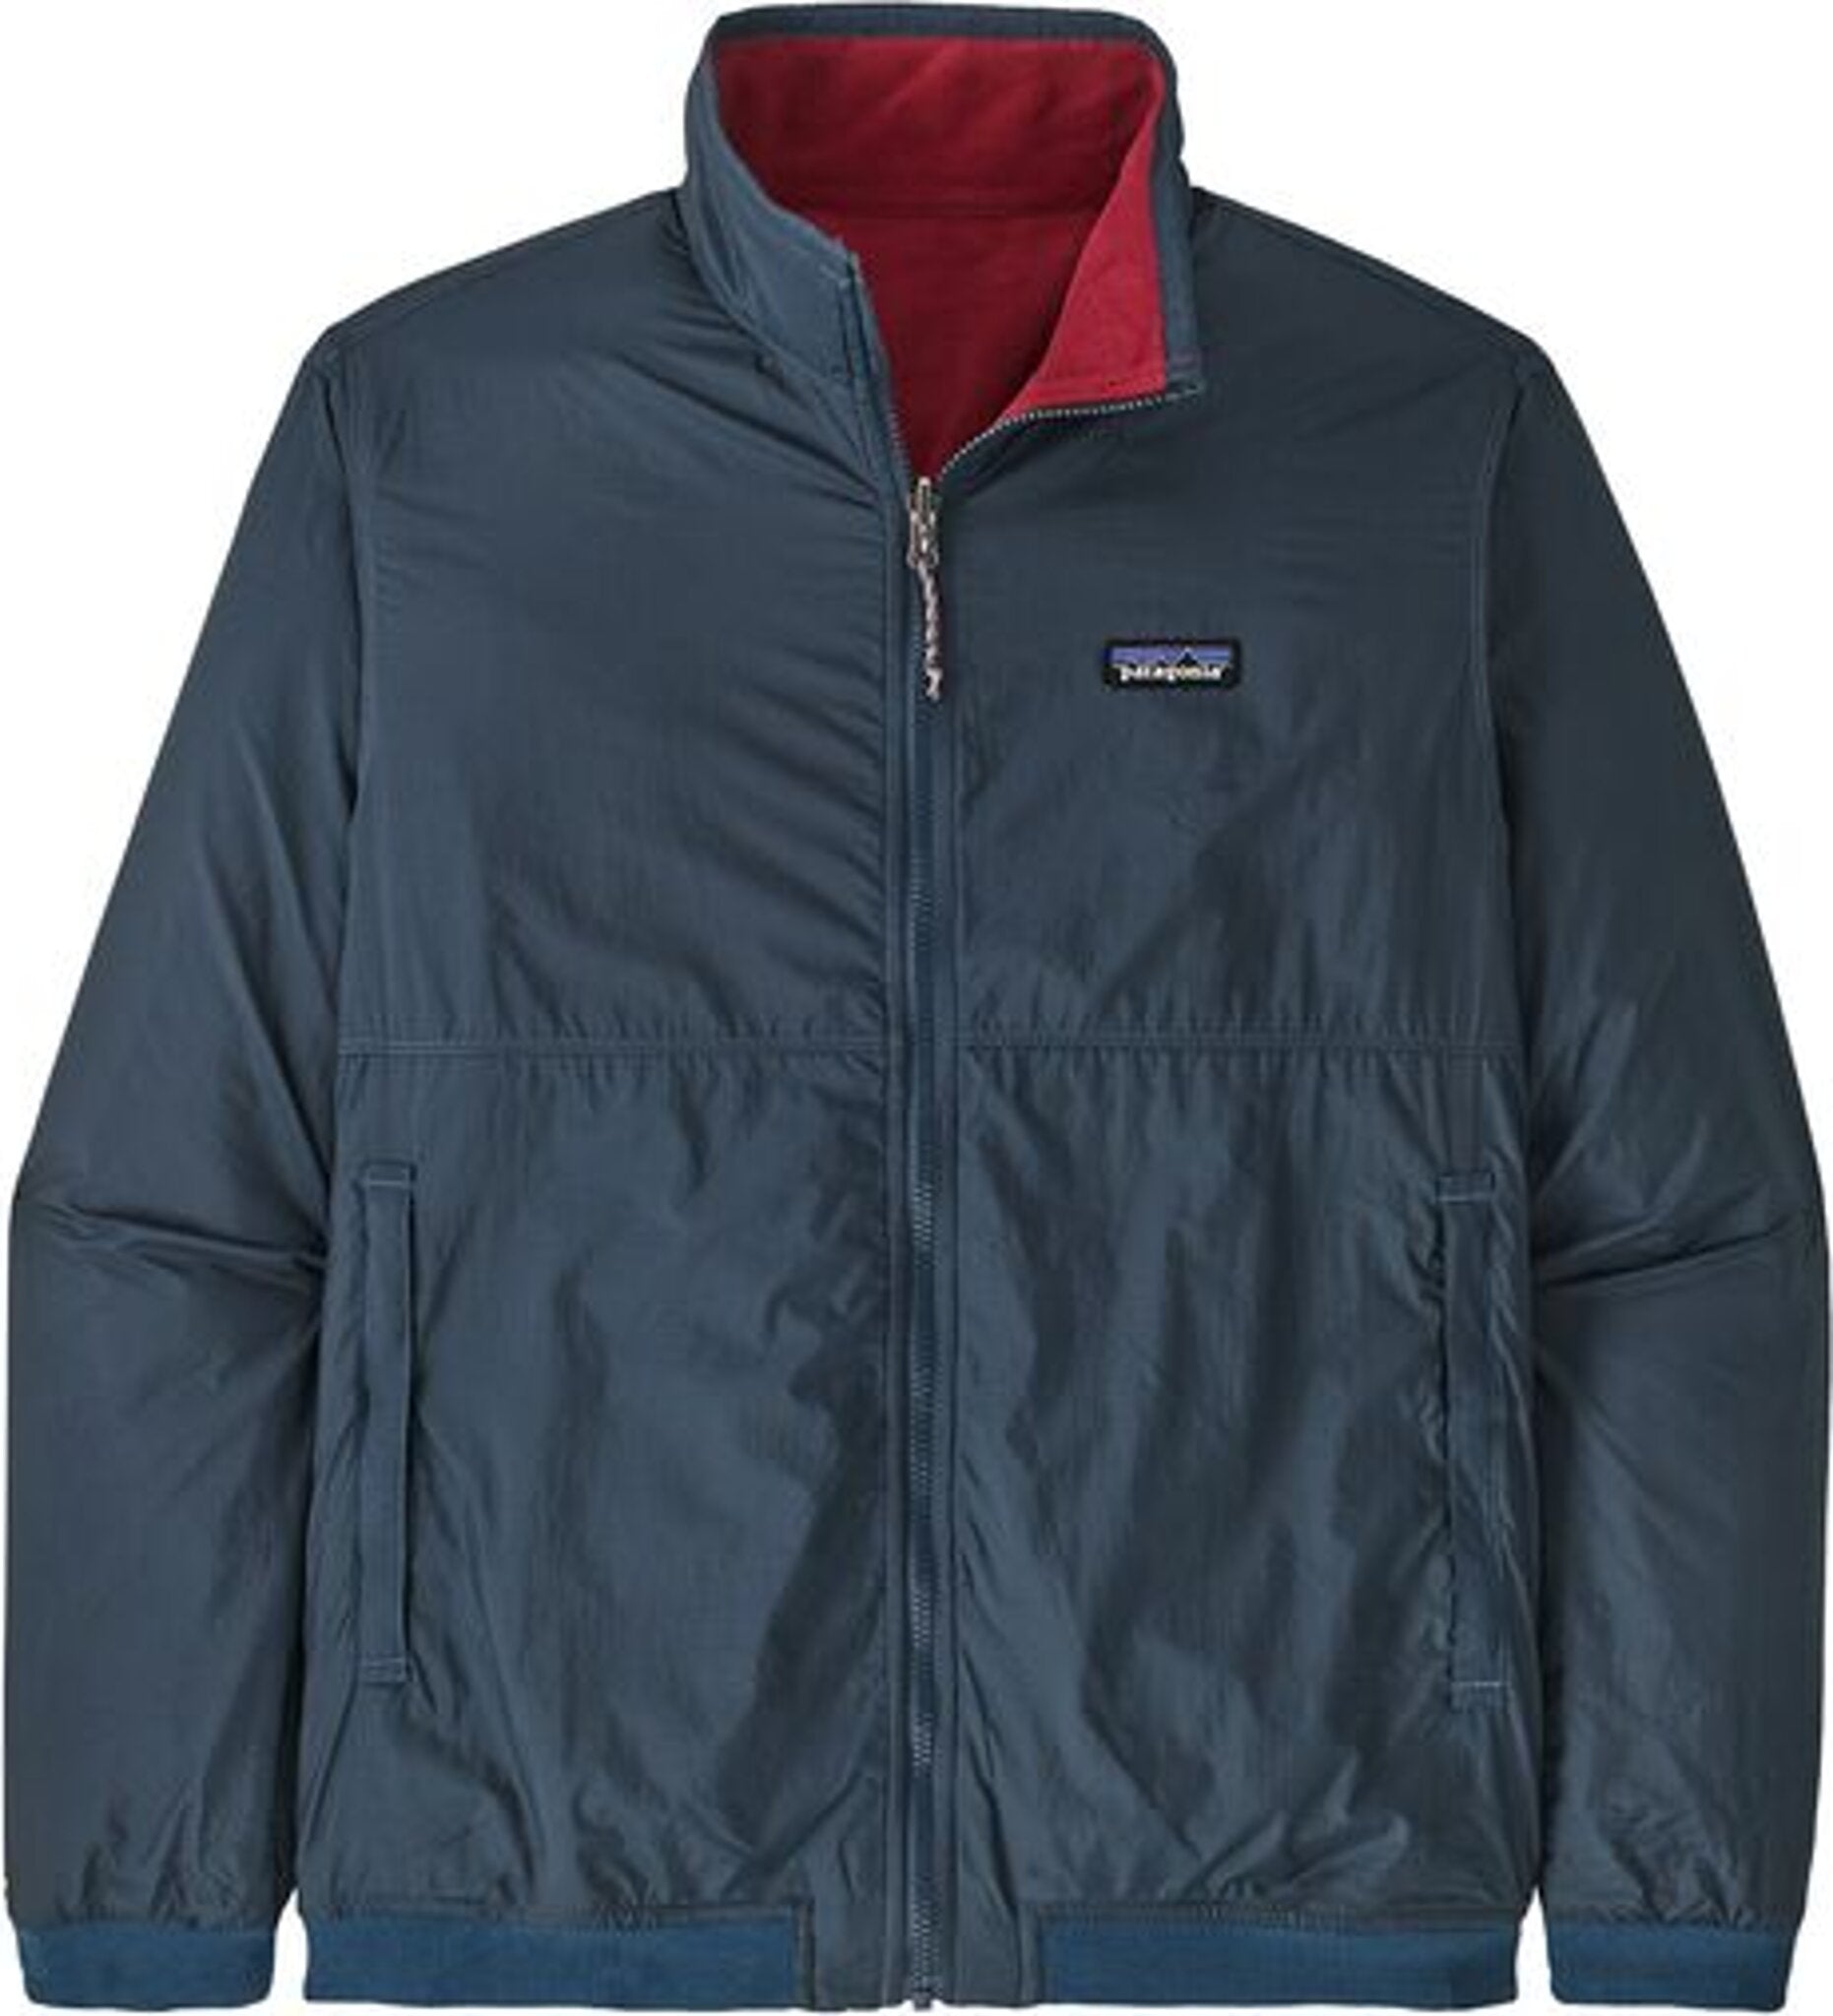 manteau hiver patagonia homme